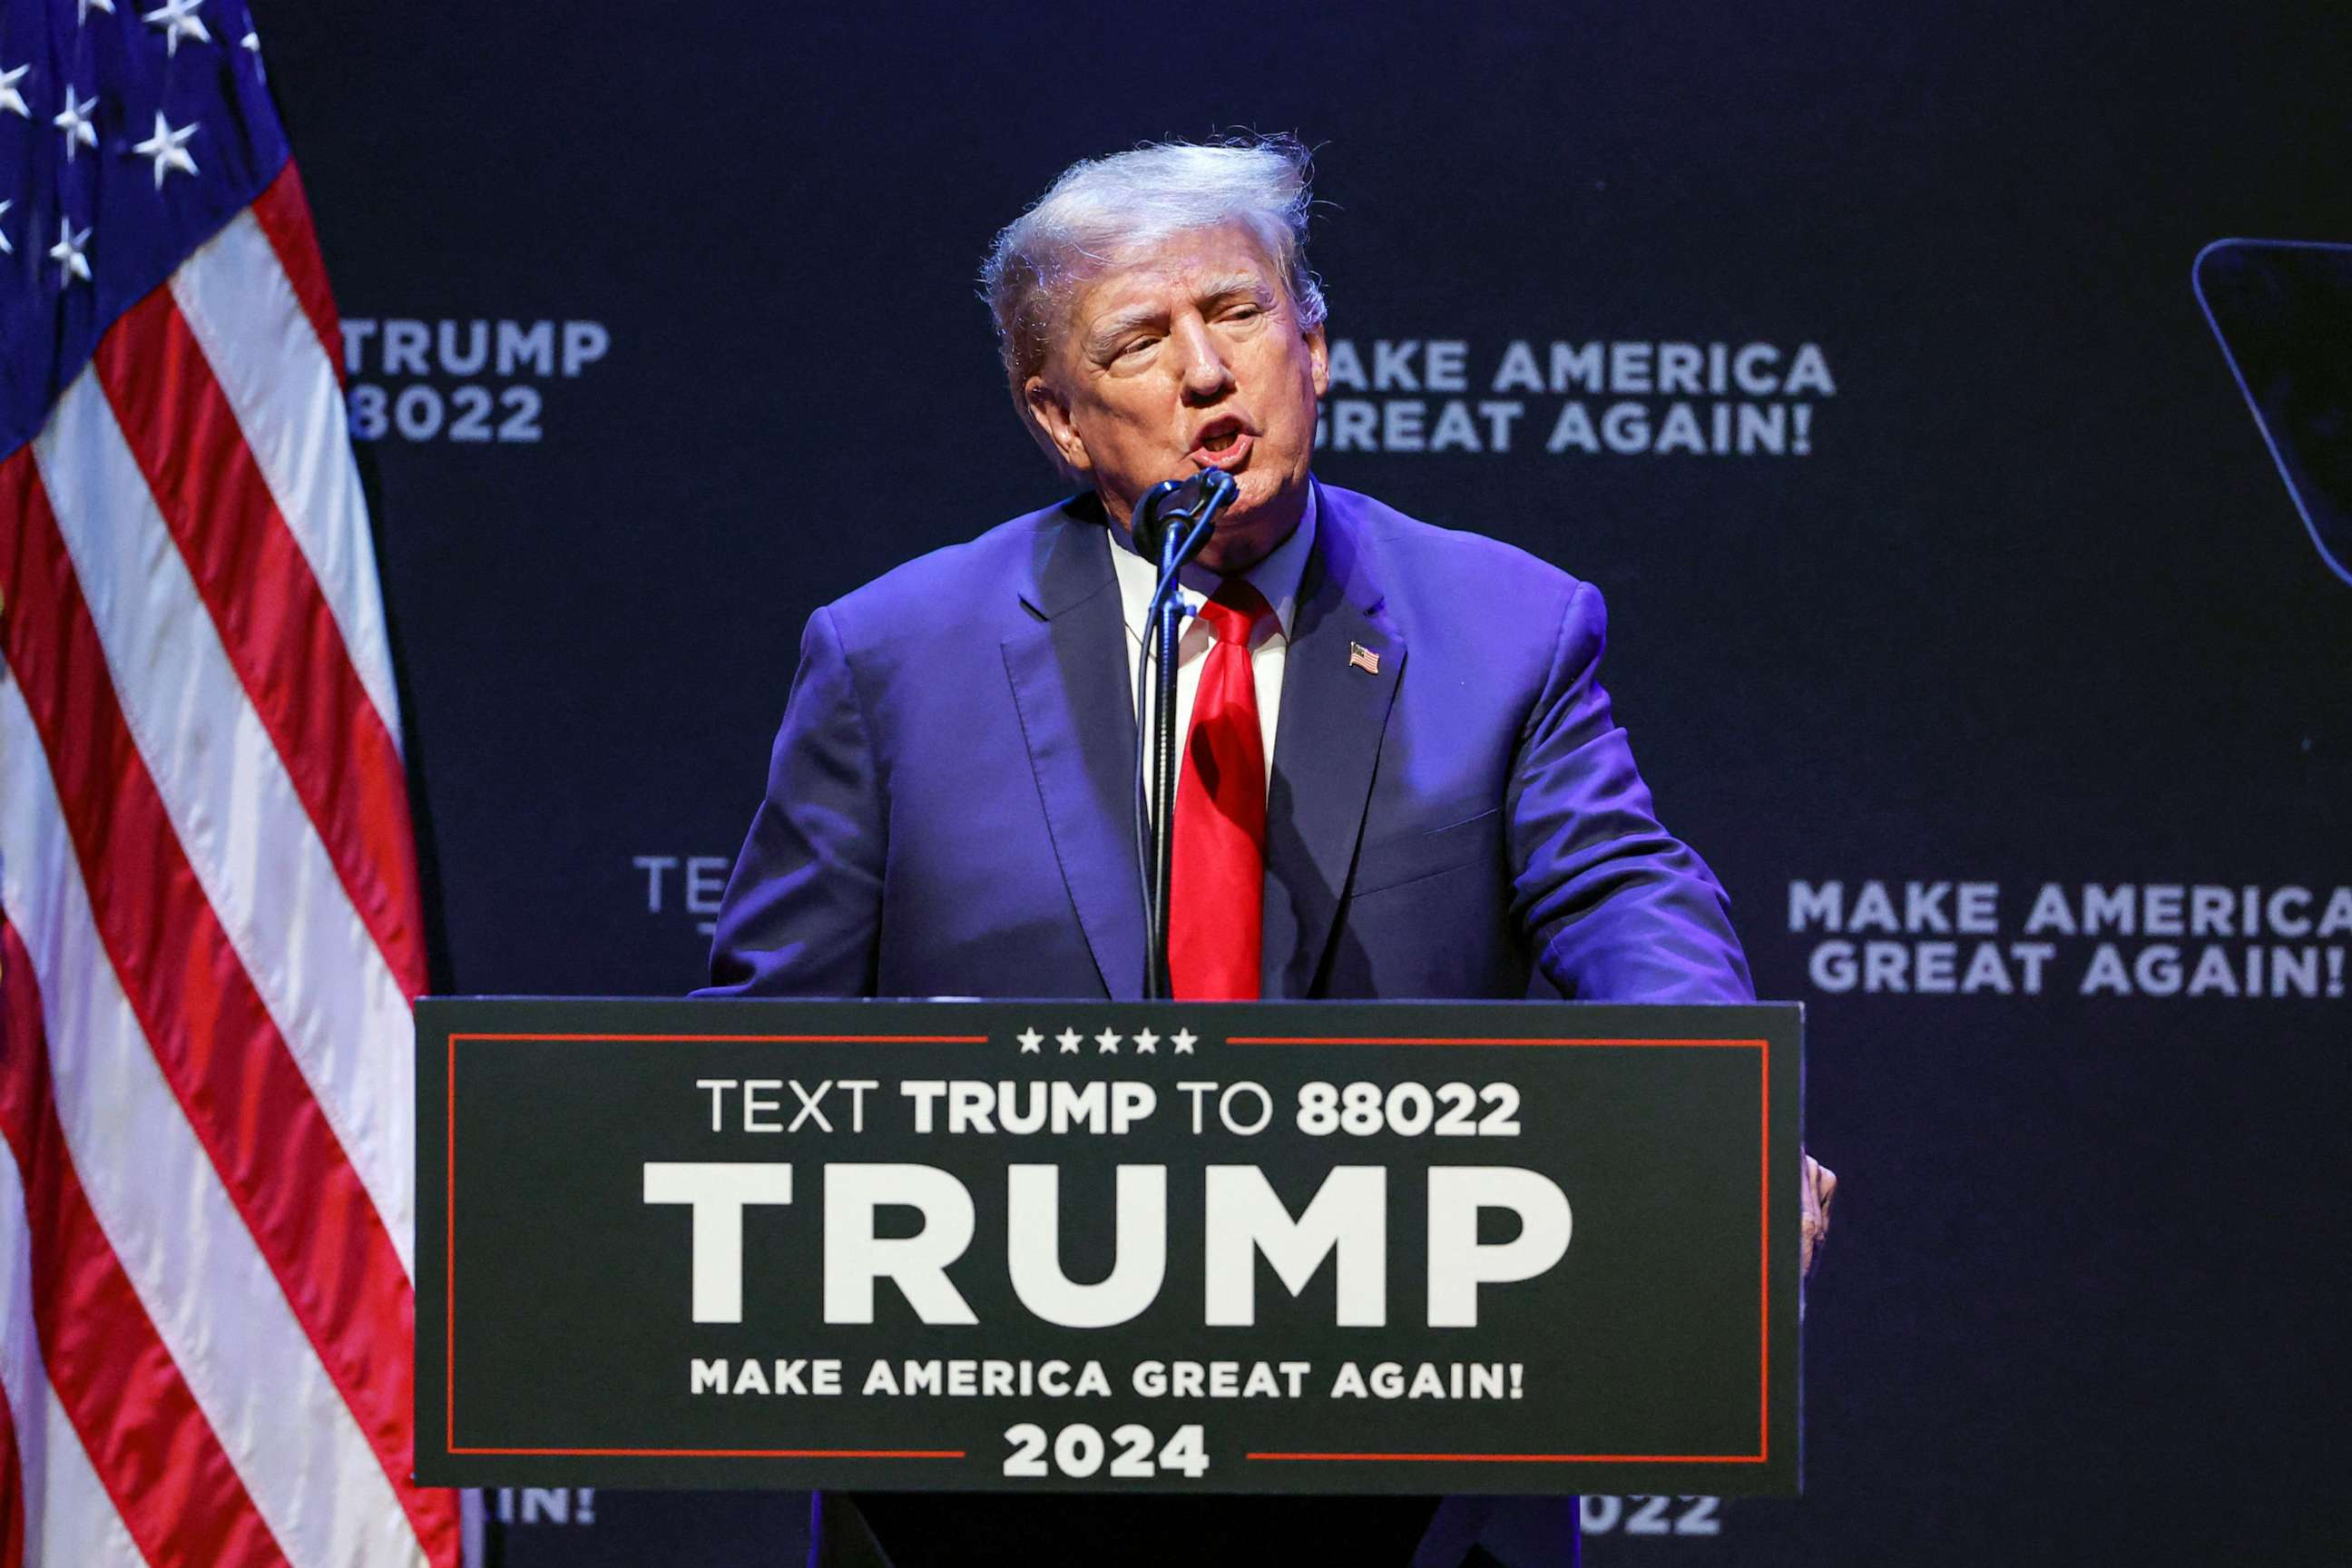 PHOTO: In this March 13, 2023, file photo, former President Donald Trump speaks at the Adler Theatre in Davenport, Iowa.